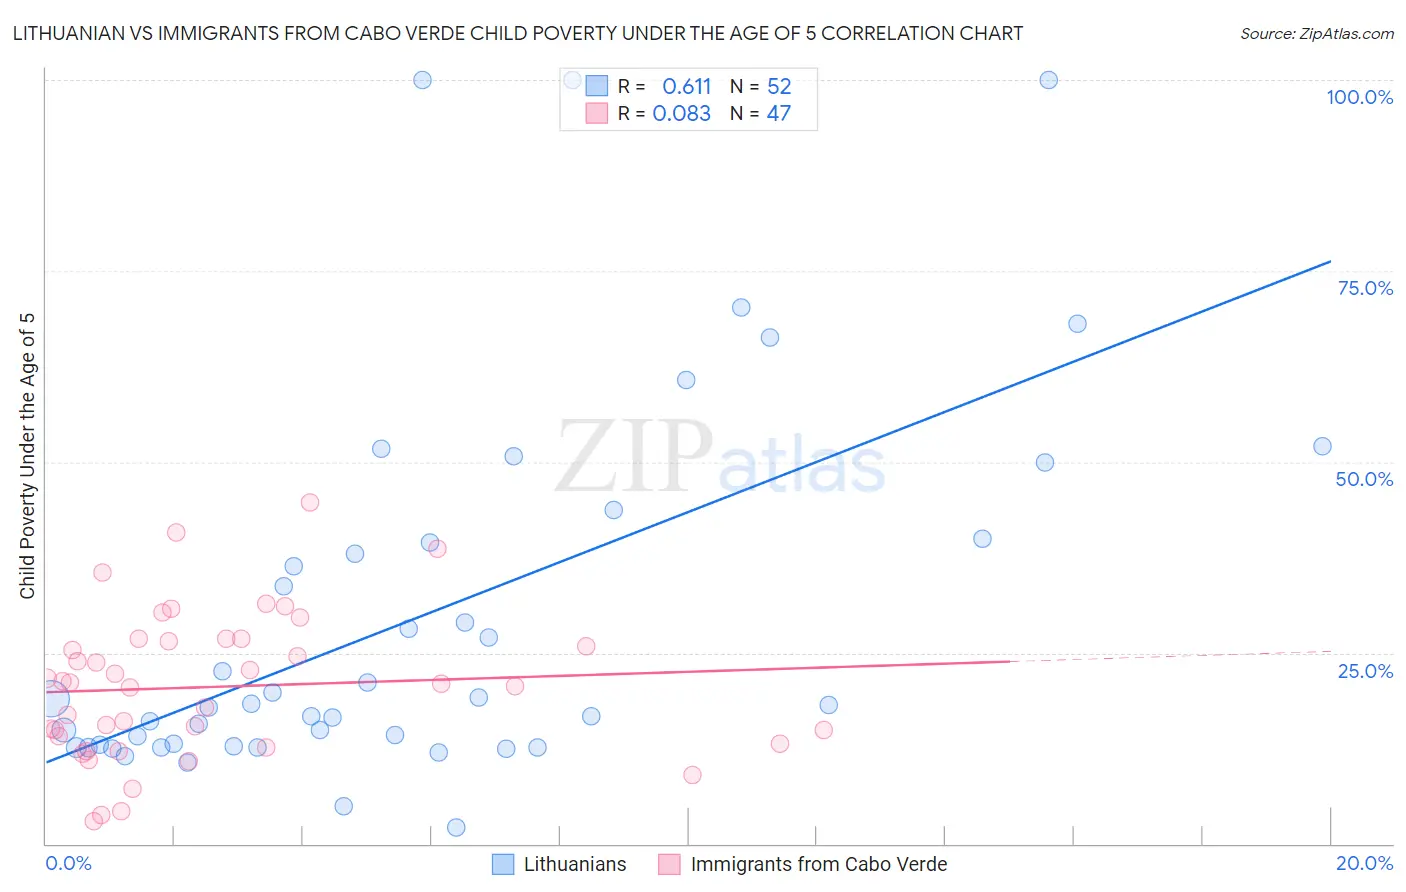 Lithuanian vs Immigrants from Cabo Verde Child Poverty Under the Age of 5